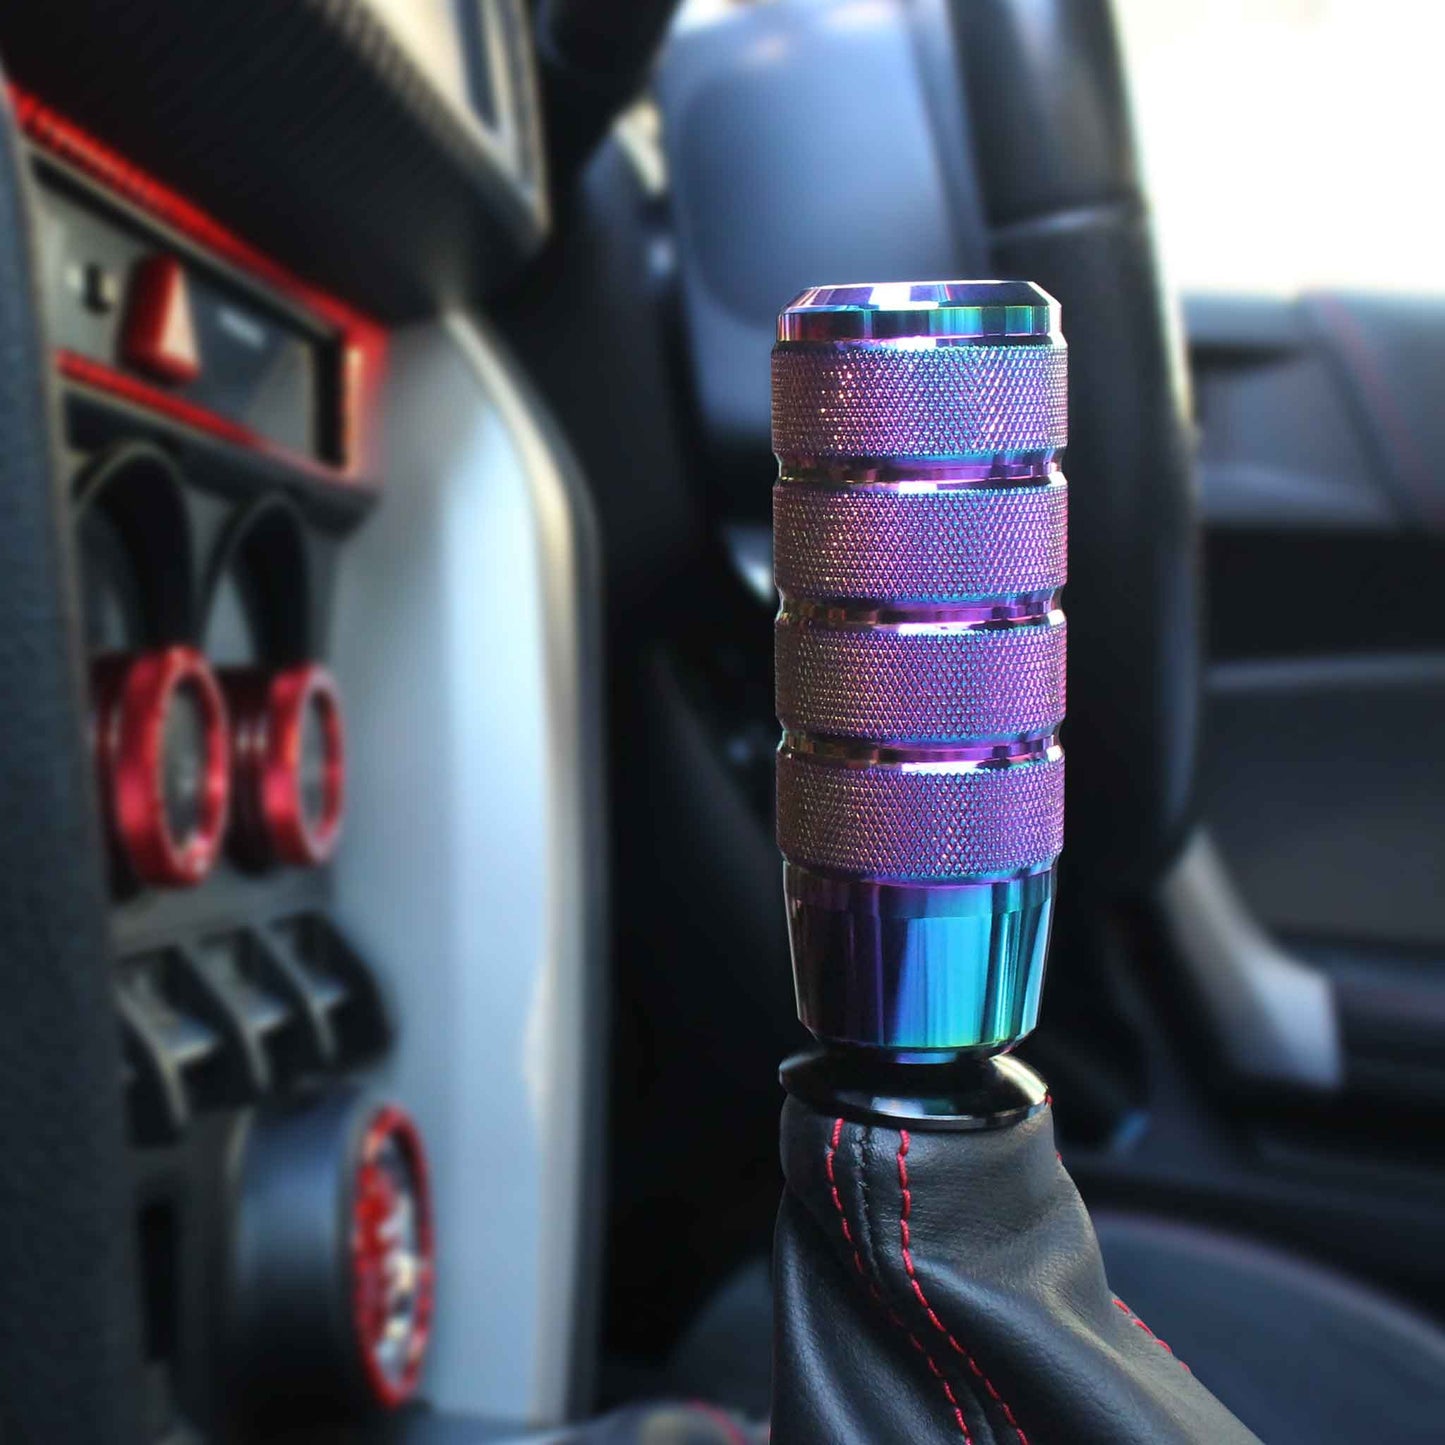 A rainbow Nagao is installed on an auto Toyota 86 with no gap between the shift knob and the shift boot